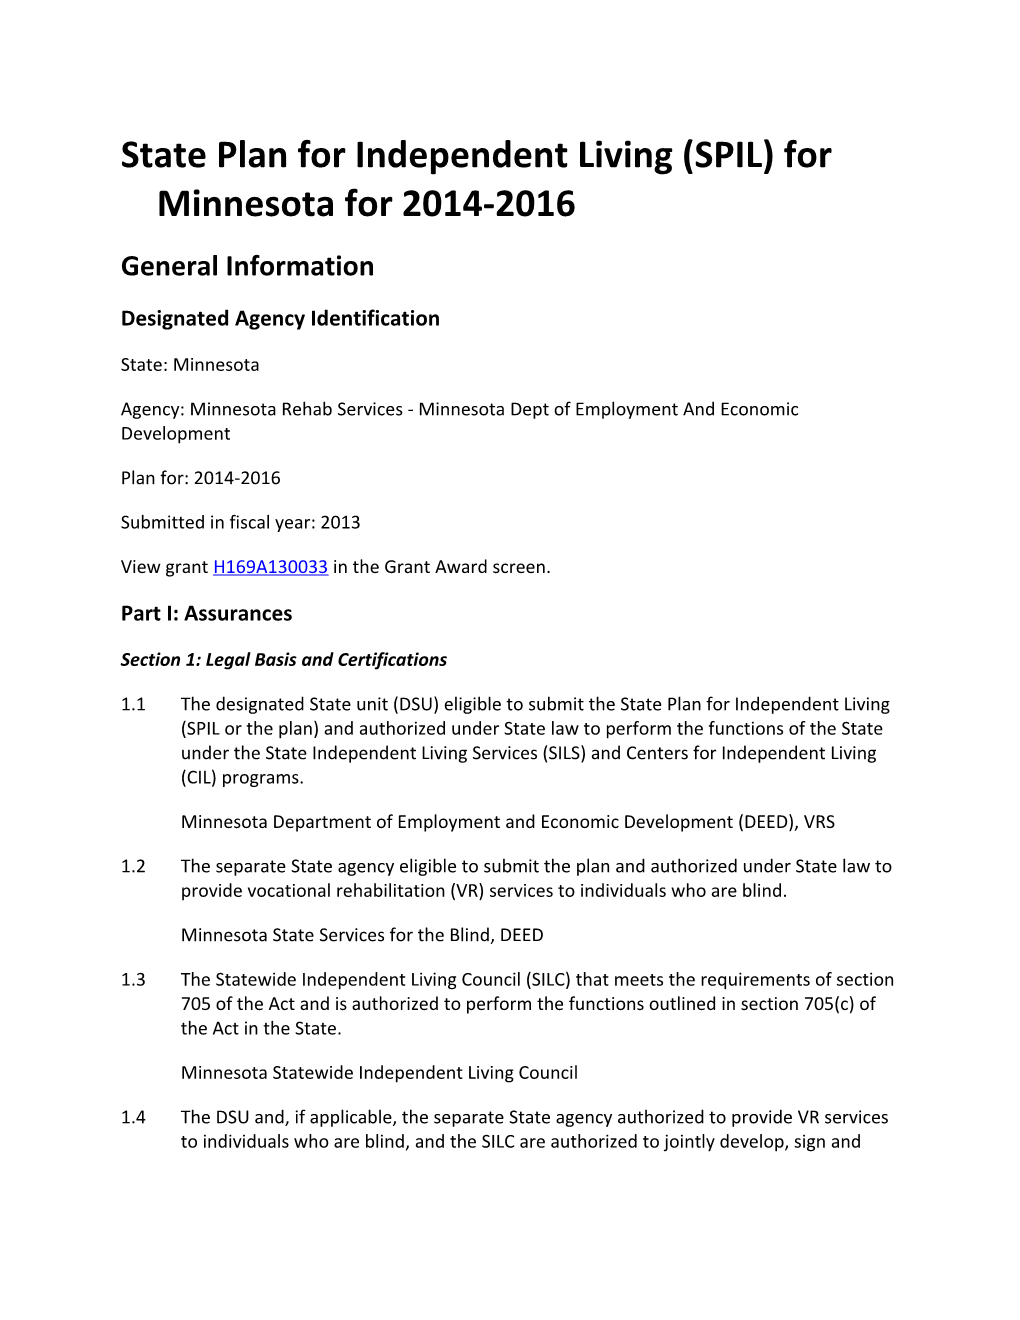 State Plan for Independent Living 2014-2016